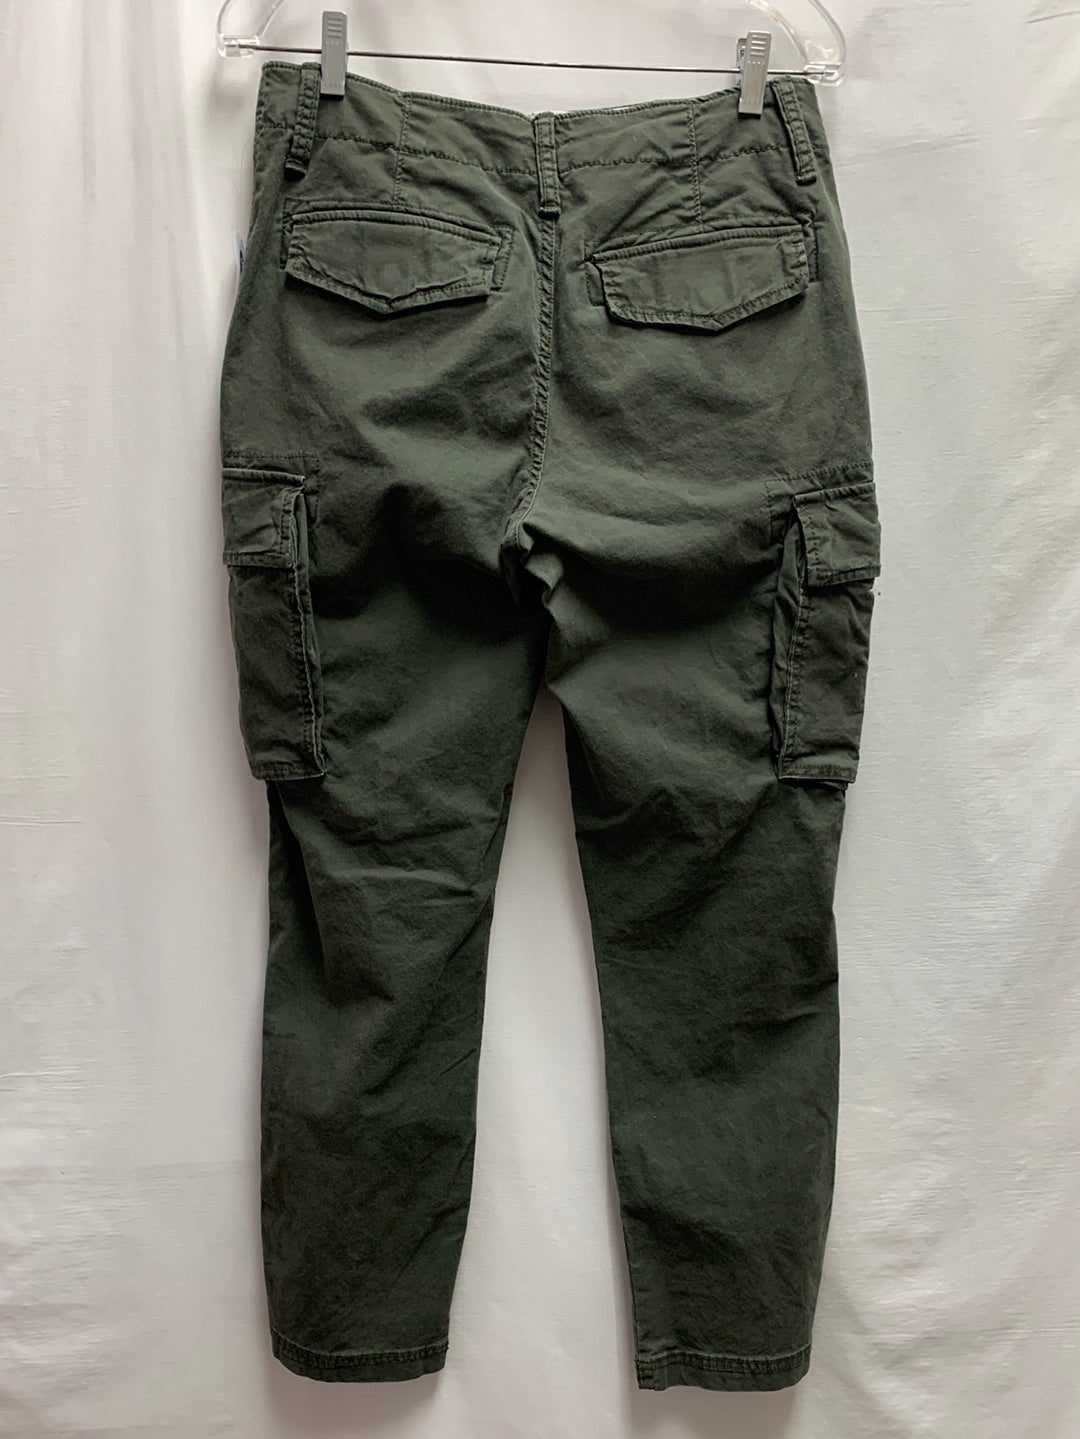 NWT - OLD NAVY olive Lived-In Straight Built-In Flex Cargo Pants - 29 x 30